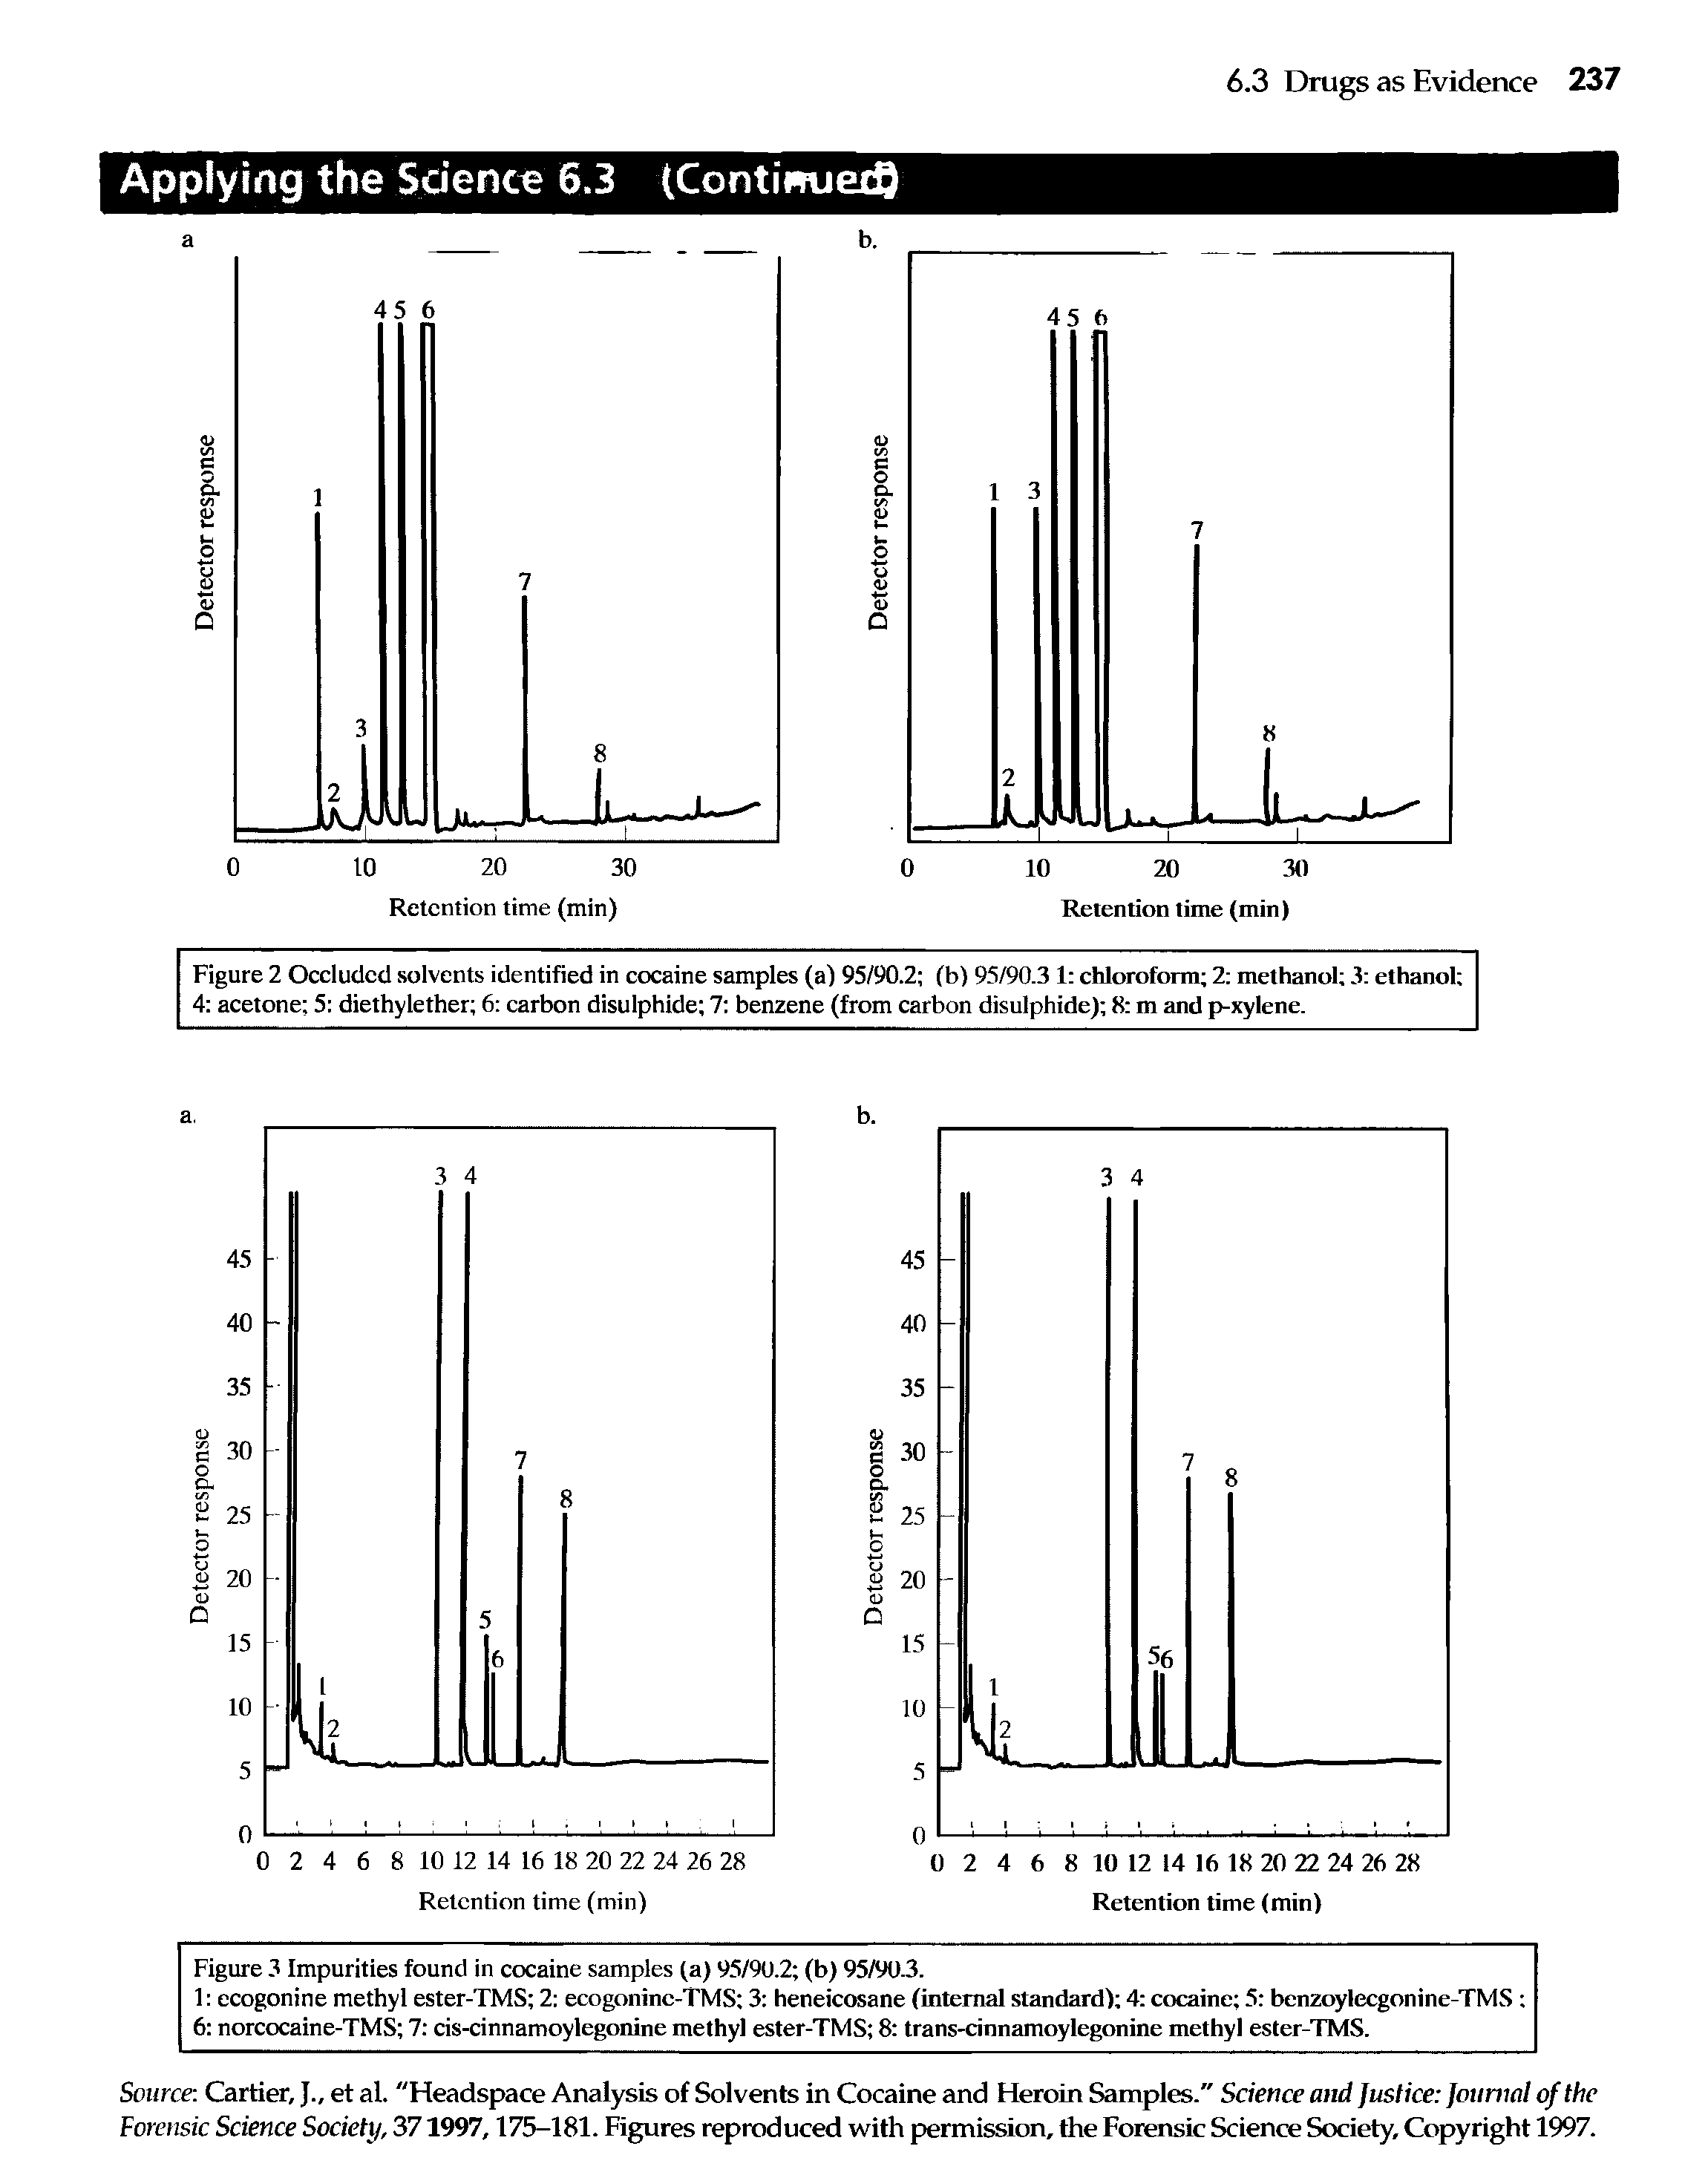 Figure 2 Occluded solvents identified in cocaine samples (a) 95/90.2 (b) 95/90.3 1 chloroform 2 methanol 3 ethanol 4 acetone 5 diethylether 6 carbon disulphide 7 benzene (from carbon disulphide) 8 m and p-xylene.